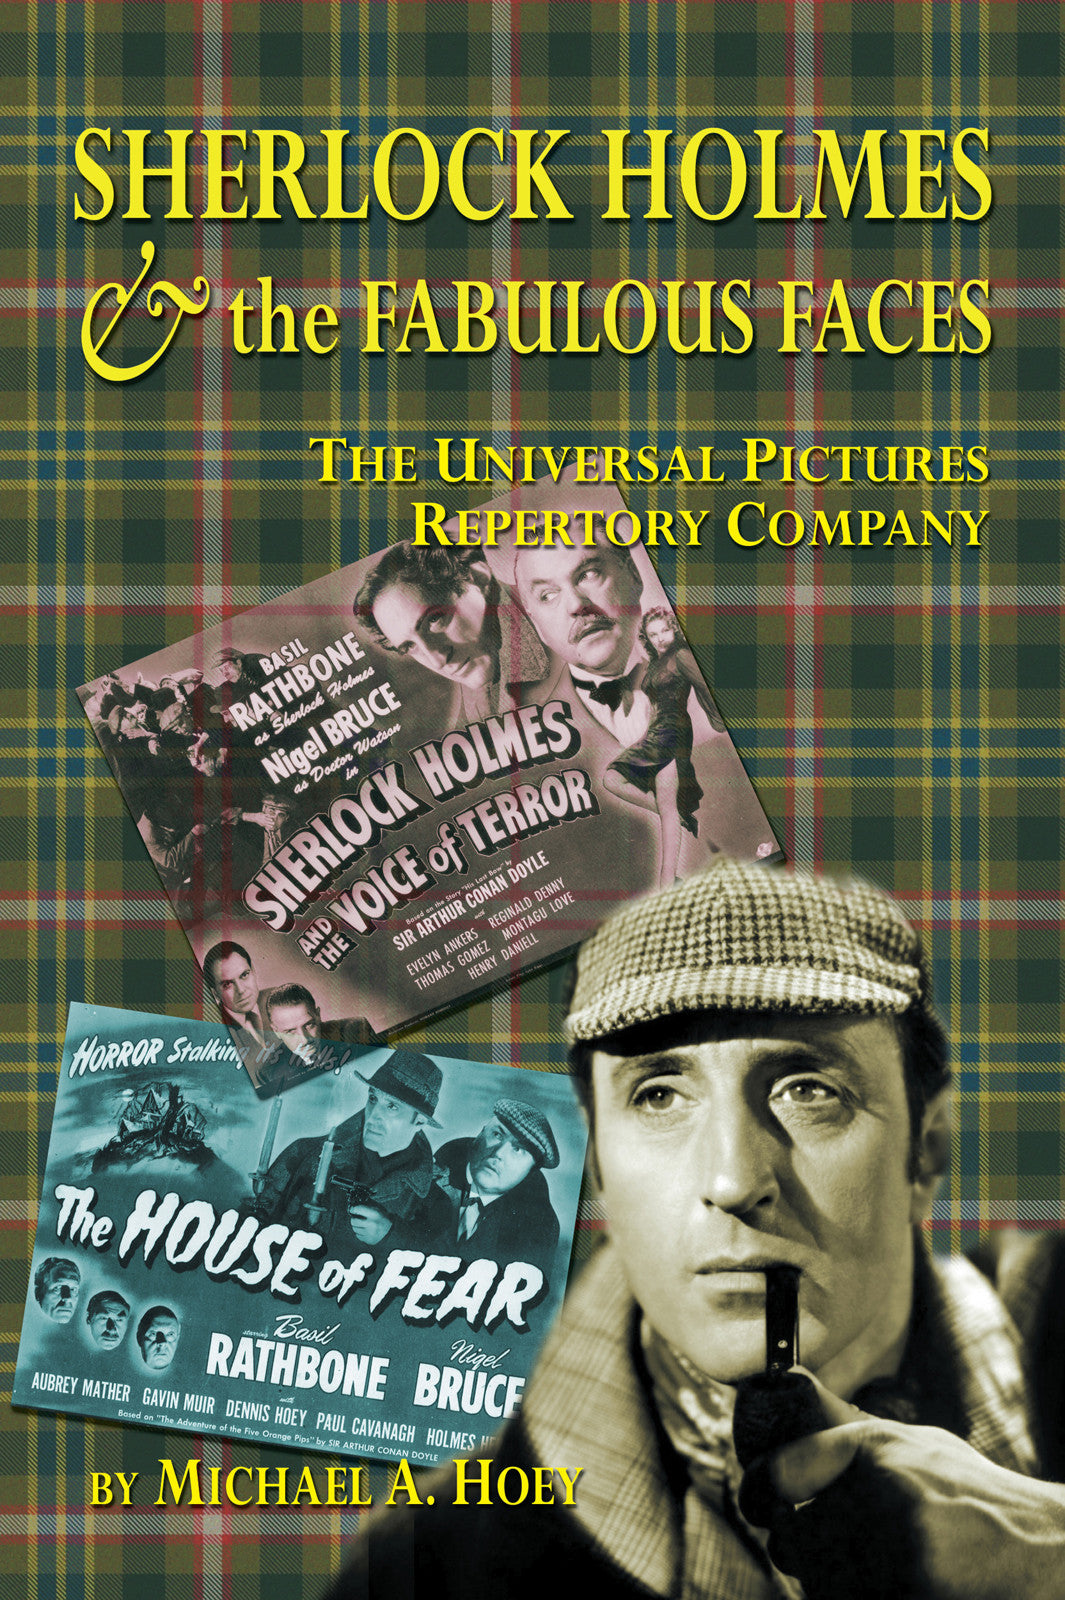 Sherlock Holmes & the Fabulous Faces - The Universal Pictures Repertory Company (paperback)